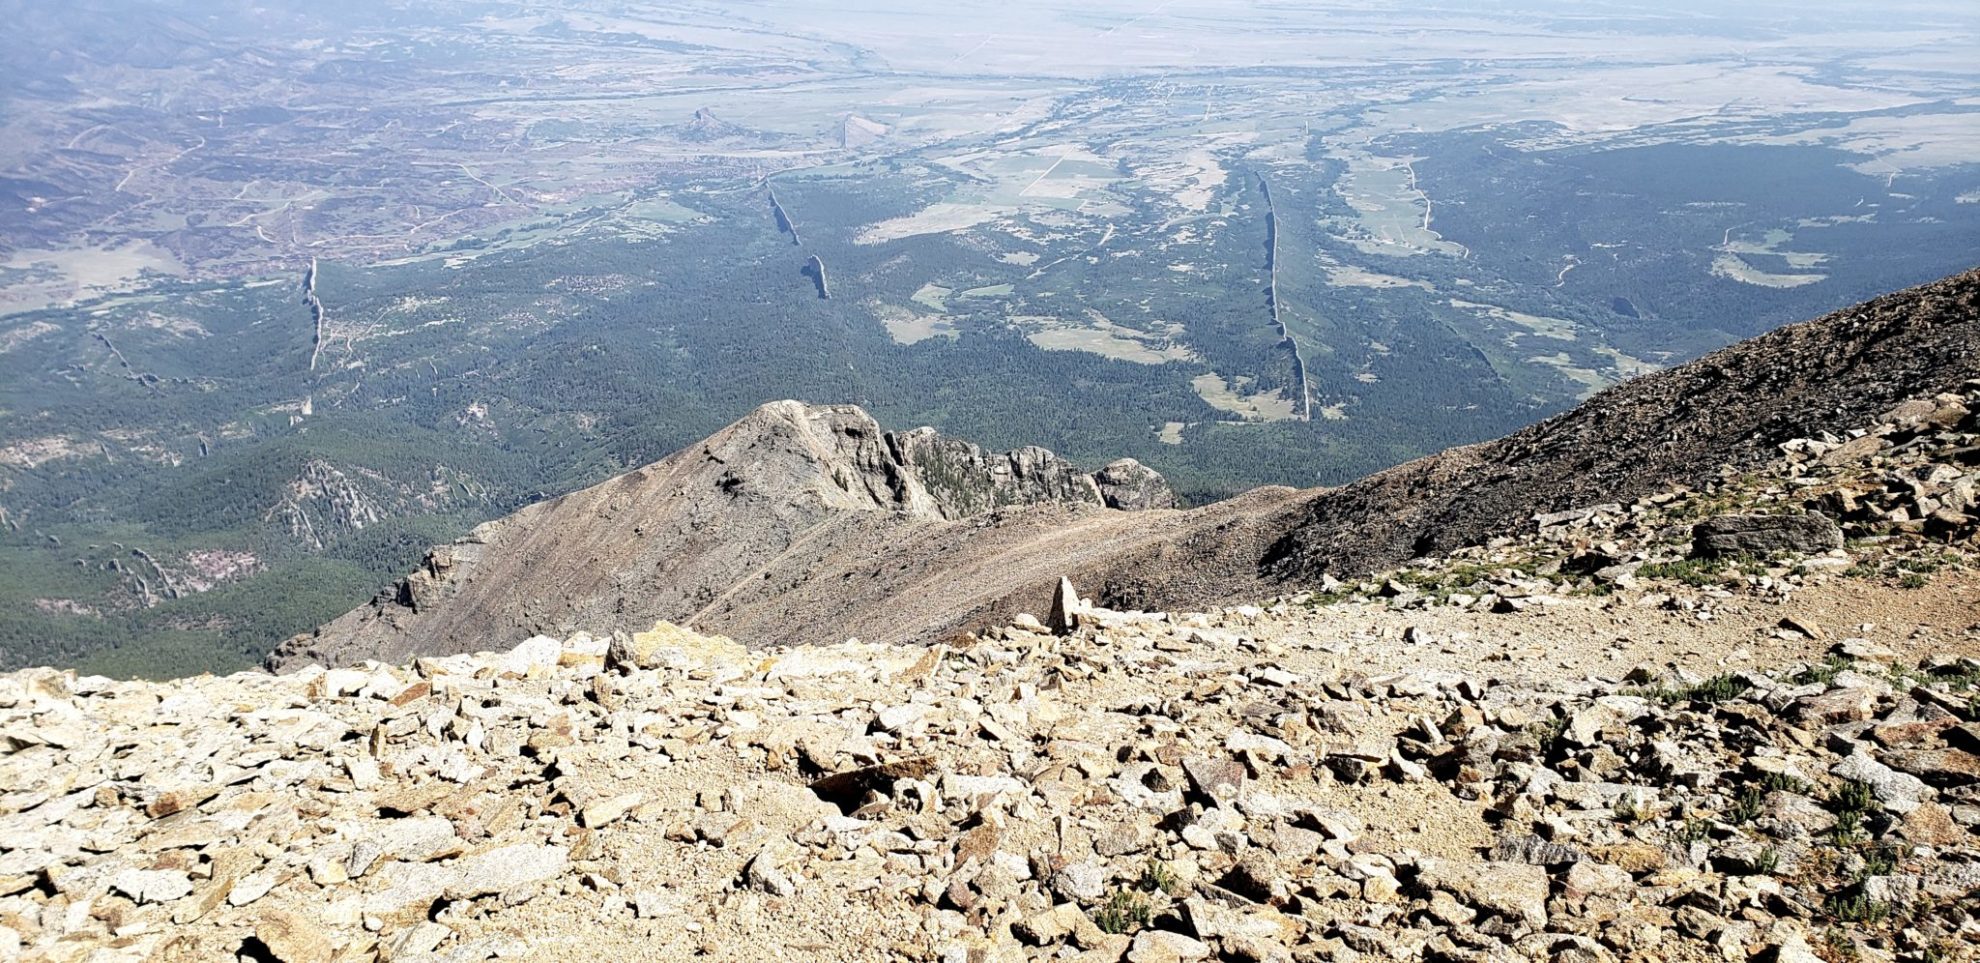 View of the dikes radiating out from the summit